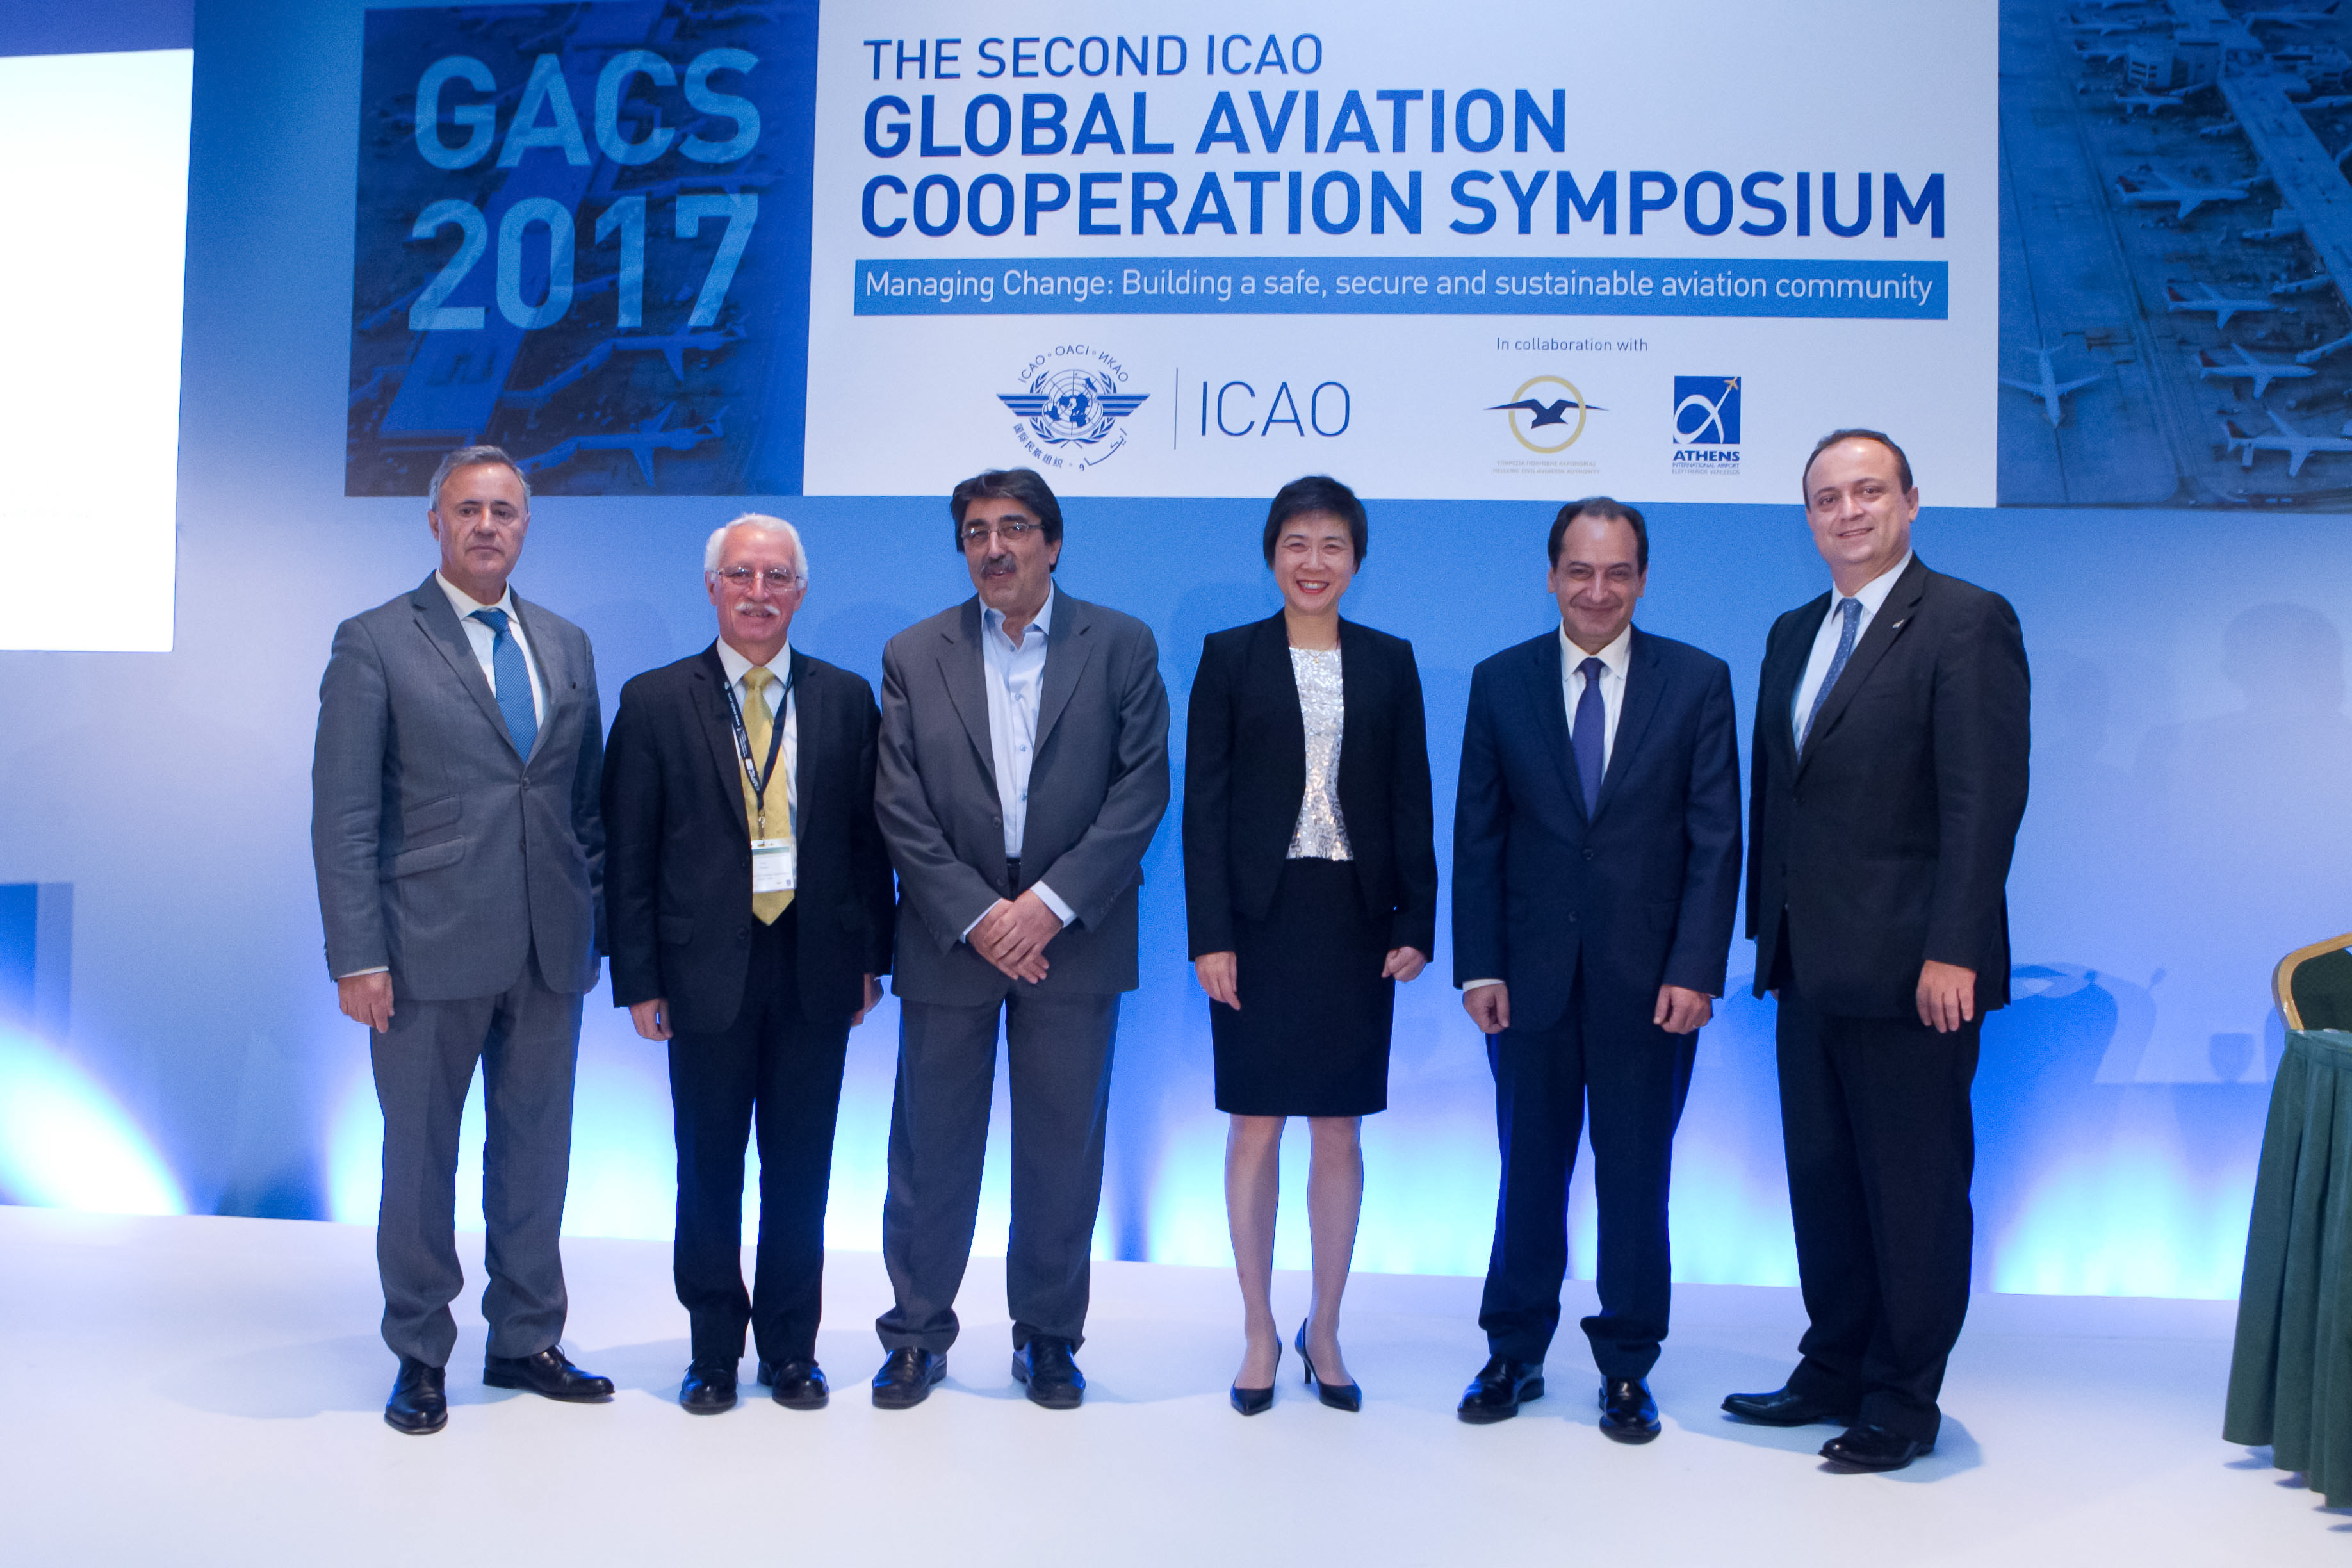 The Second Global Aviation Cooperation Symposium